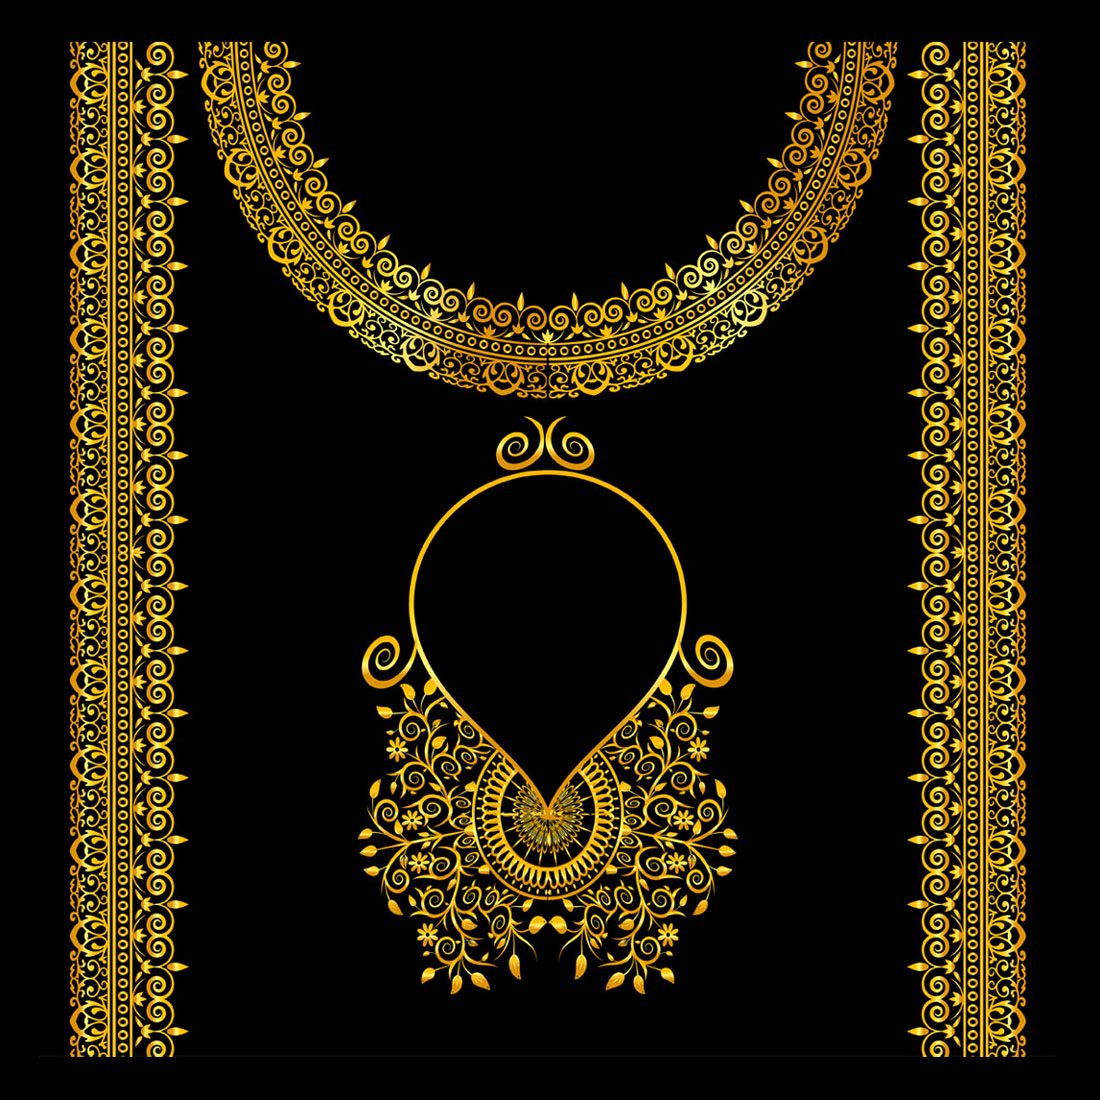 Golden Woman Dress Ornament Frame Design Vector Around Neck and Chest main cover.